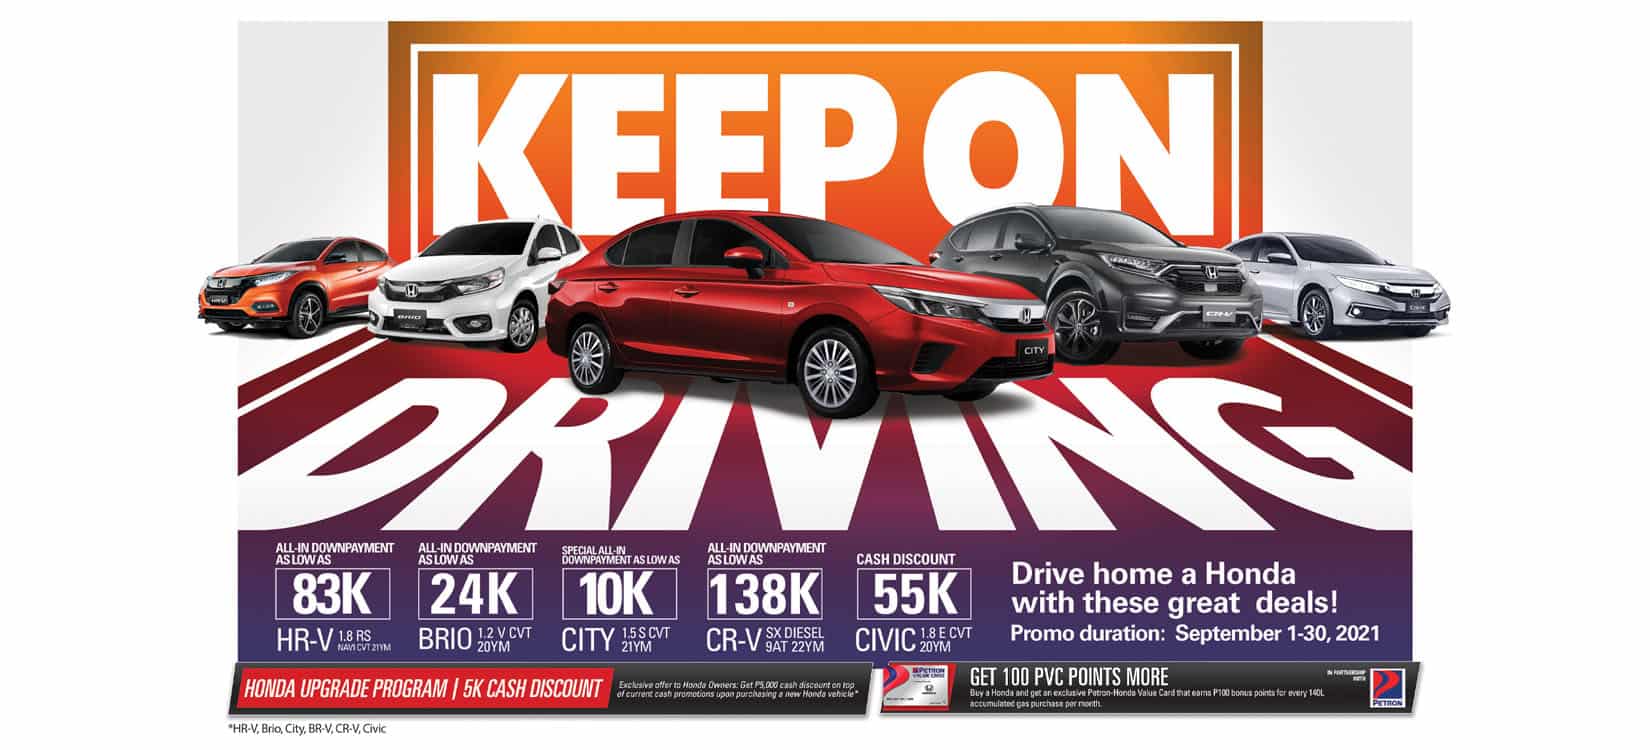 Honda extends “Keep on Driving” promo until end of September